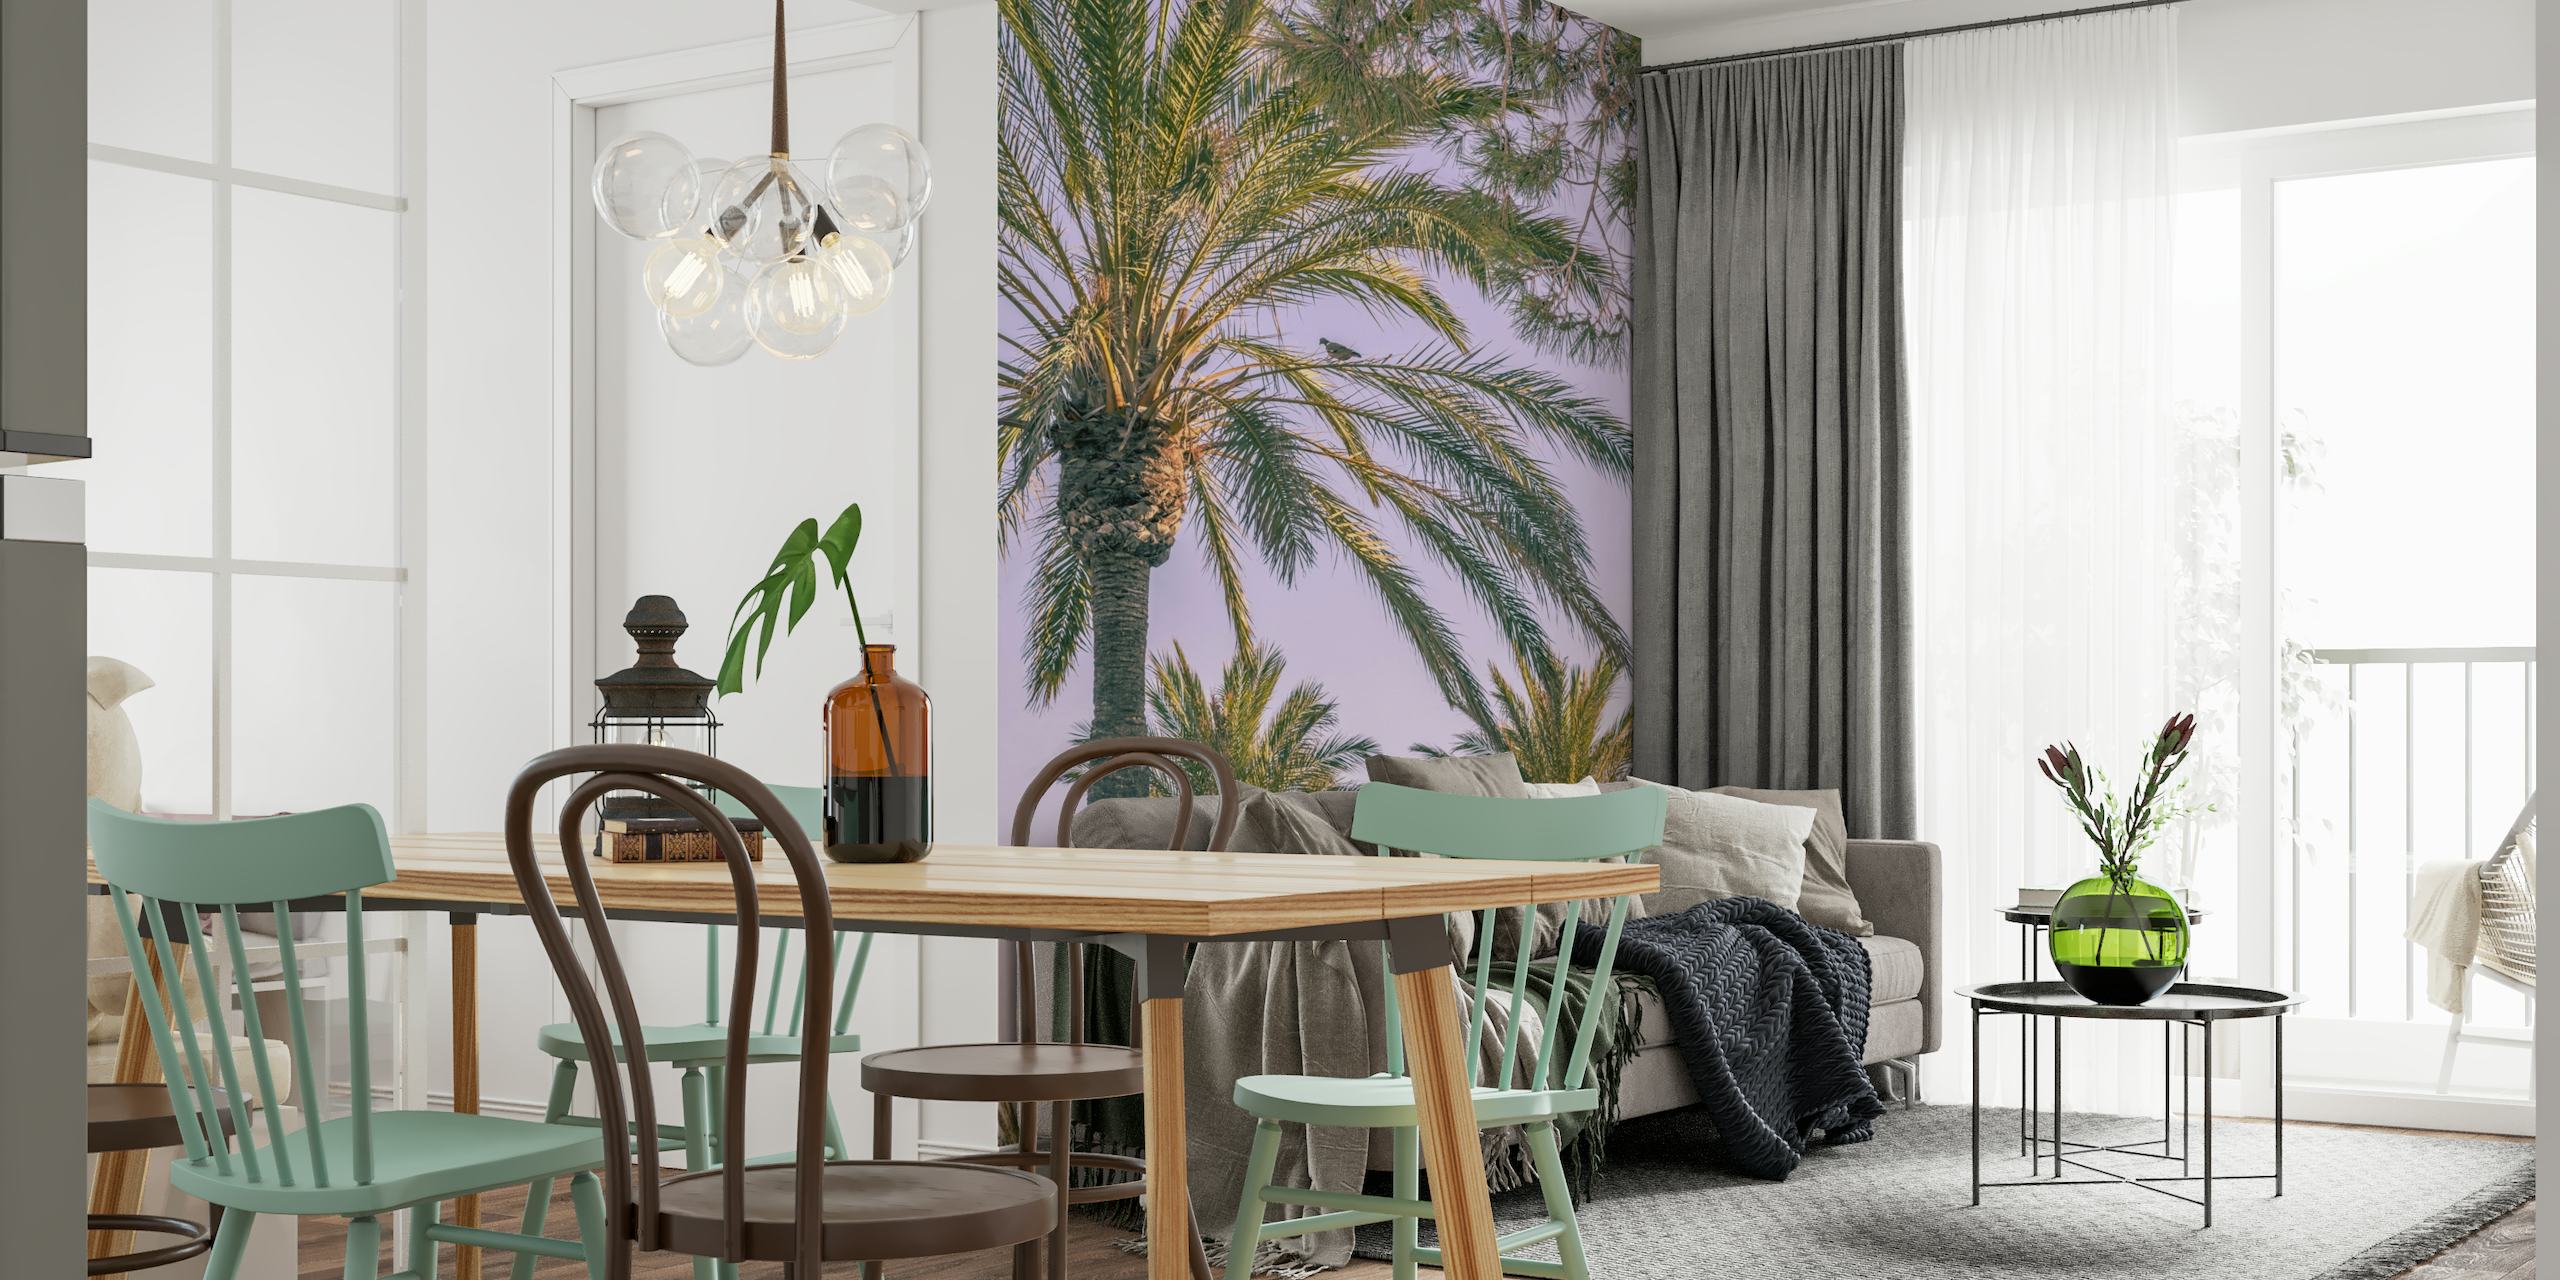 Tropical palm tree forest behang